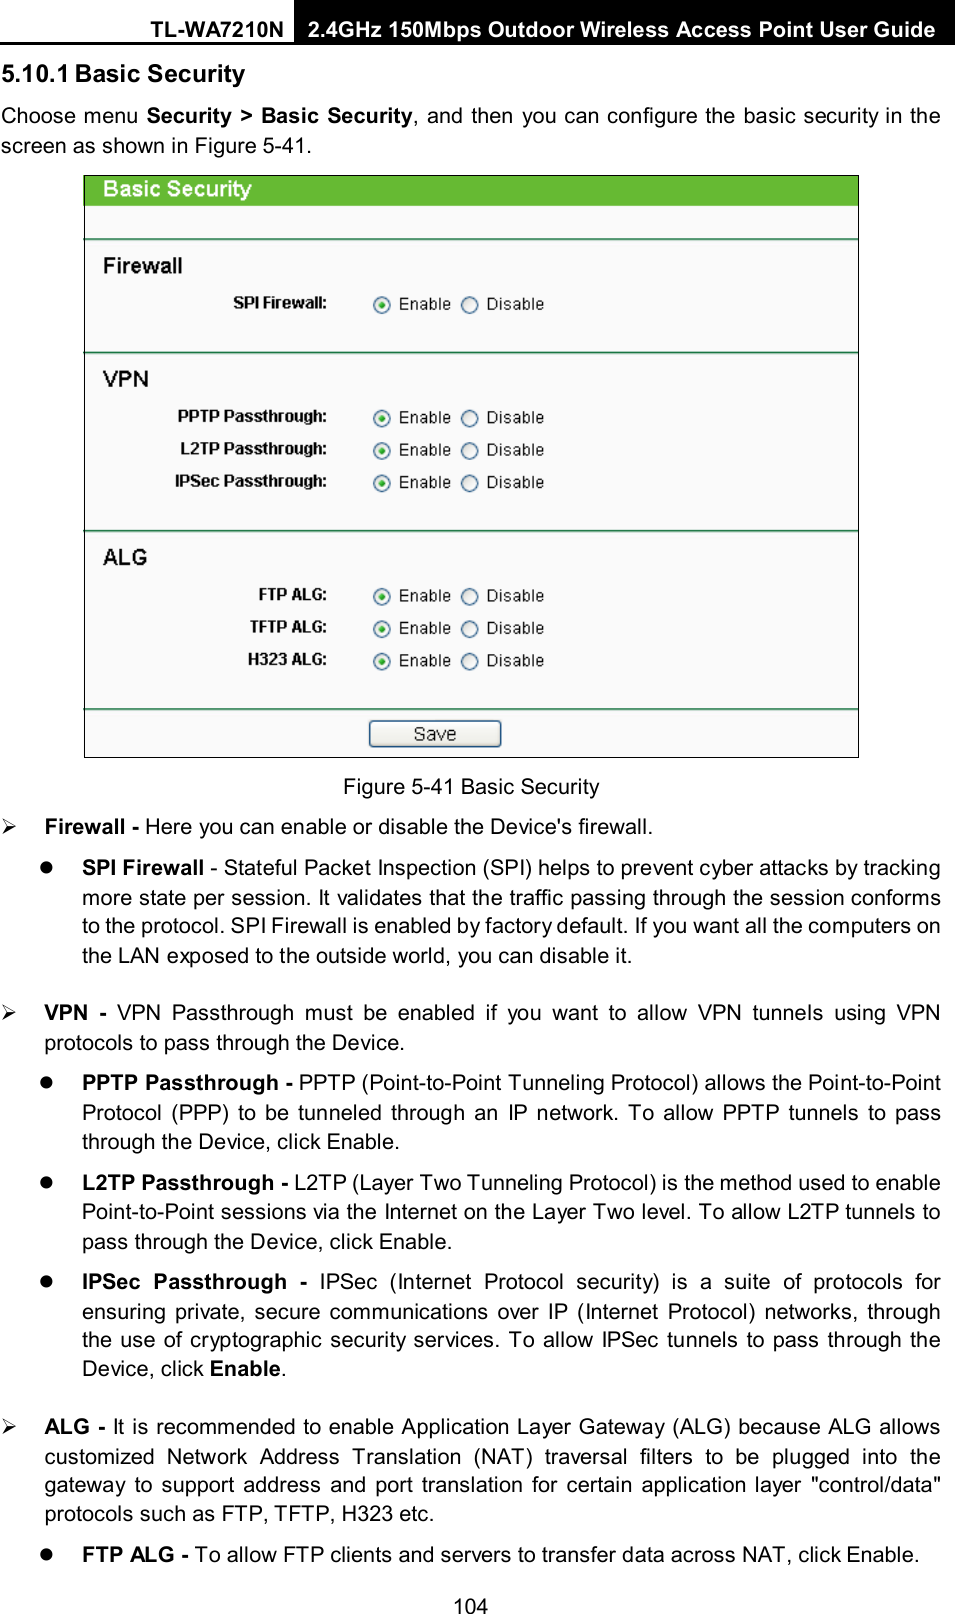 TL-WA7210N 2.4GHz 150Mbps Outdoor Wireless Access Point User Guide  1045.10.1 Basic Security Choose menu Security &gt; Basic Security, and then you can configure the basic security in the screen as shown in Figure 5-41.  Figure 5-41 Basic Security  Firewall - Here you can enable or disable the Device&apos;s firewall.    SPI Firewall - Stateful Packet Inspection (SPI) helps to prevent cyber attacks by tracking more state per session. It validates that the traffic passing through the session conforms to the protocol. SPI Firewall is enabled by factory default. If you want all the computers on the LAN exposed to the outside world, you can disable it.    VPN - VPN Passthrough must be enabled if you want to allow VPN tunnels using VPN protocols to pass through the Device.    PPTP Passthrough - PPTP (Point-to-Point Tunneling Protocol) allows the Point-to-Point Protocol (PPP) to be tunneled through an IP network. To allow PPTP tunnels to pass through the Device, click Enable.    L2TP Passthrough - L2TP (Layer Two Tunneling Protocol) is the method used to enable Point-to-Point sessions via the Internet on the Layer Two level. To allow L2TP tunnels to pass through the Device, click Enable.    IPSec Passthrough -  IPSec (Internet Protocol security)  is a suite of protocols for ensuring private, secure communications over IP (Internet Protocol) networks, through the use of cryptographic security services. To allow IPSec tunnels to pass through the Device, click Enable.    ALG - It is recommended to enable Application Layer Gateway (ALG) because ALG allows customized Network Address Translation (NAT) traversal filters to be plugged into the gateway to support address and port translation for certain application layer &quot;control/data&quot; protocols such as FTP, TFTP, H323 etc.    FTP ALG - To allow FTP clients and servers to transfer data across NAT, click Enable.   